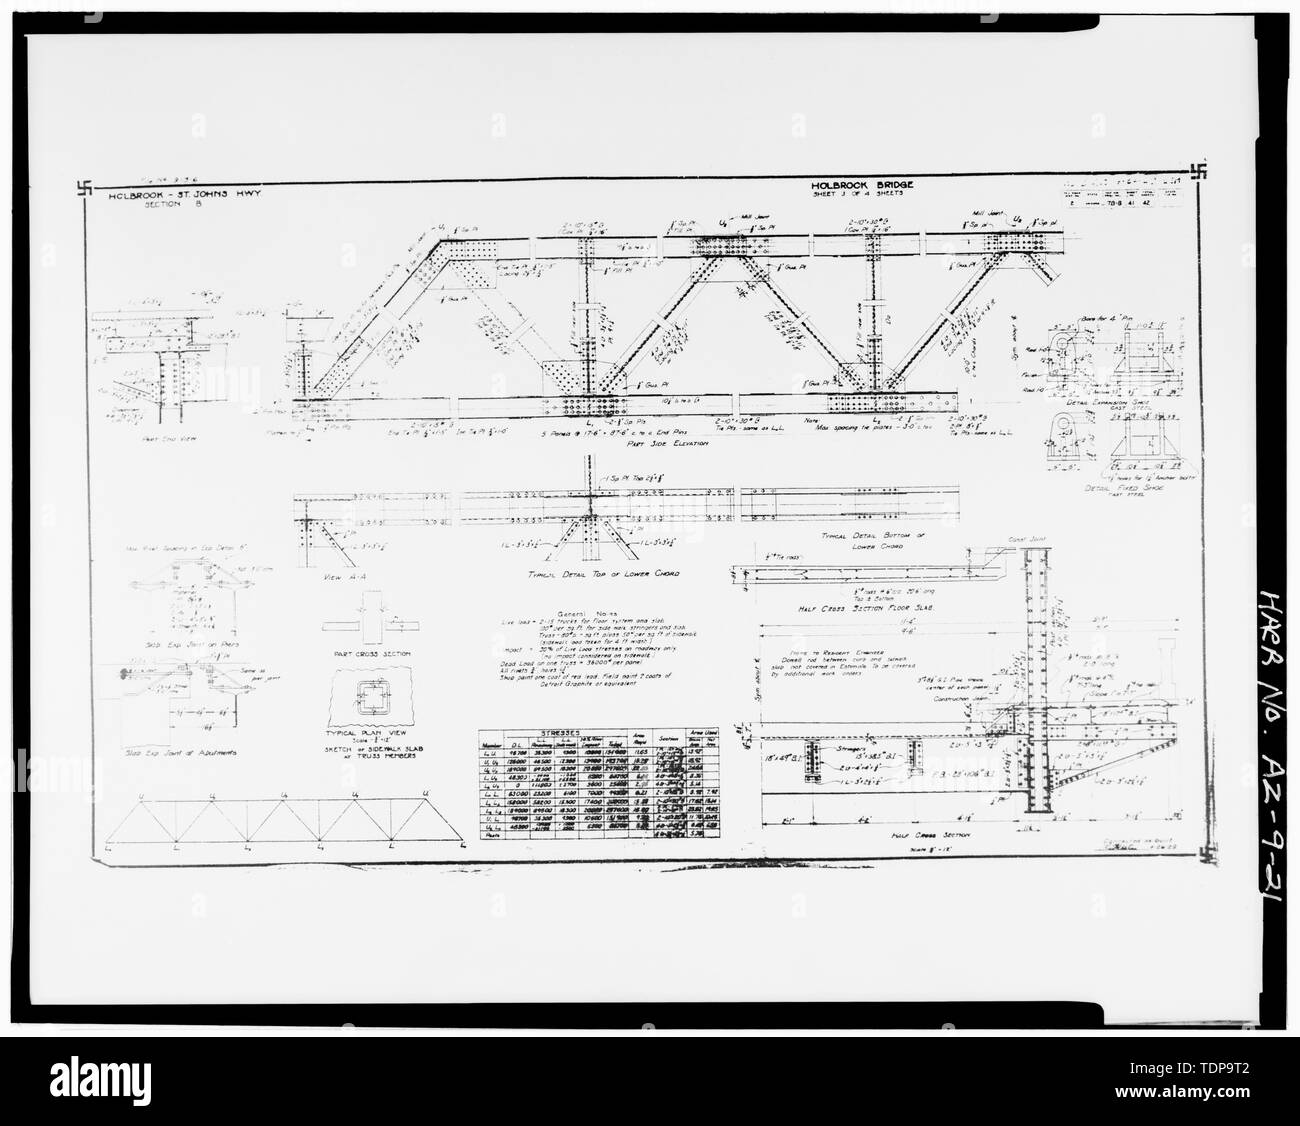 Photocopy of construction drawing dated 26 April 1929 (provided by Arizona Department of Transportation). STEEL SUPERSTRUCTURE DETAILS AND SCHEDULES. - Holbrook Bridge, Spanning Little Colorado River at AZ 77, Holbrook, Navajo County, AZ Stock Photo